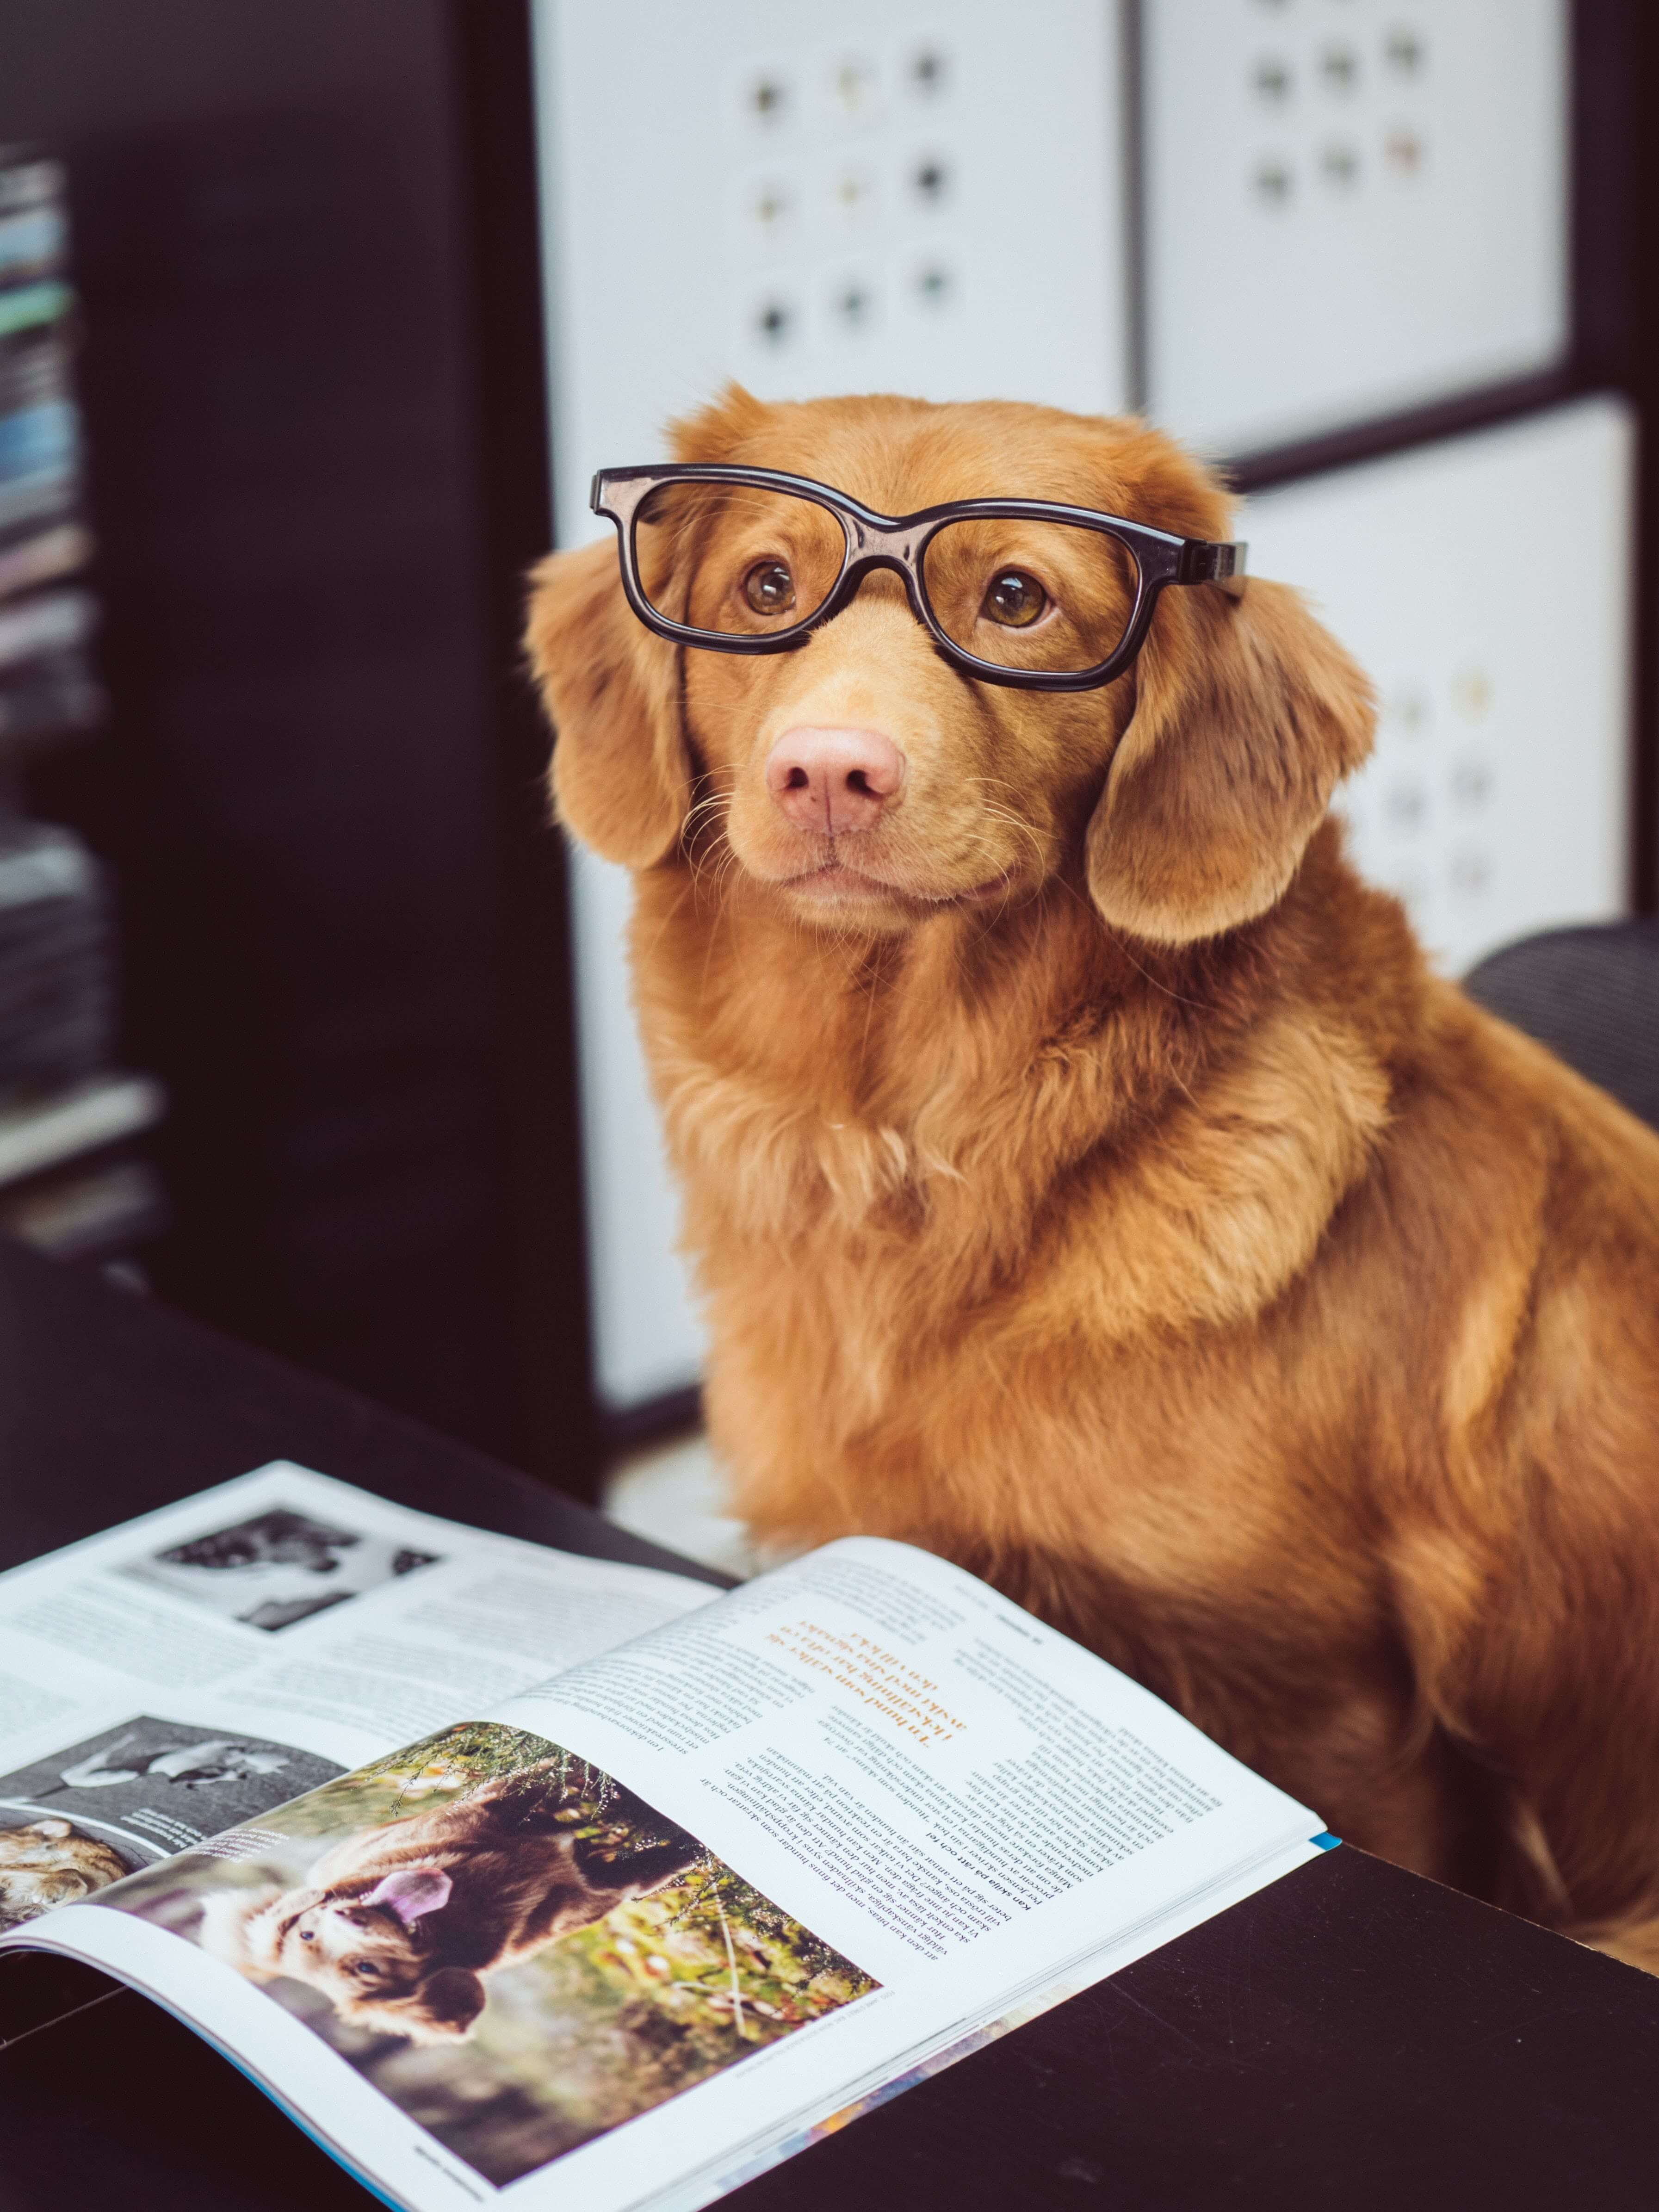 stock image of a brown dog wearing glasses, an open book on a table in front of it